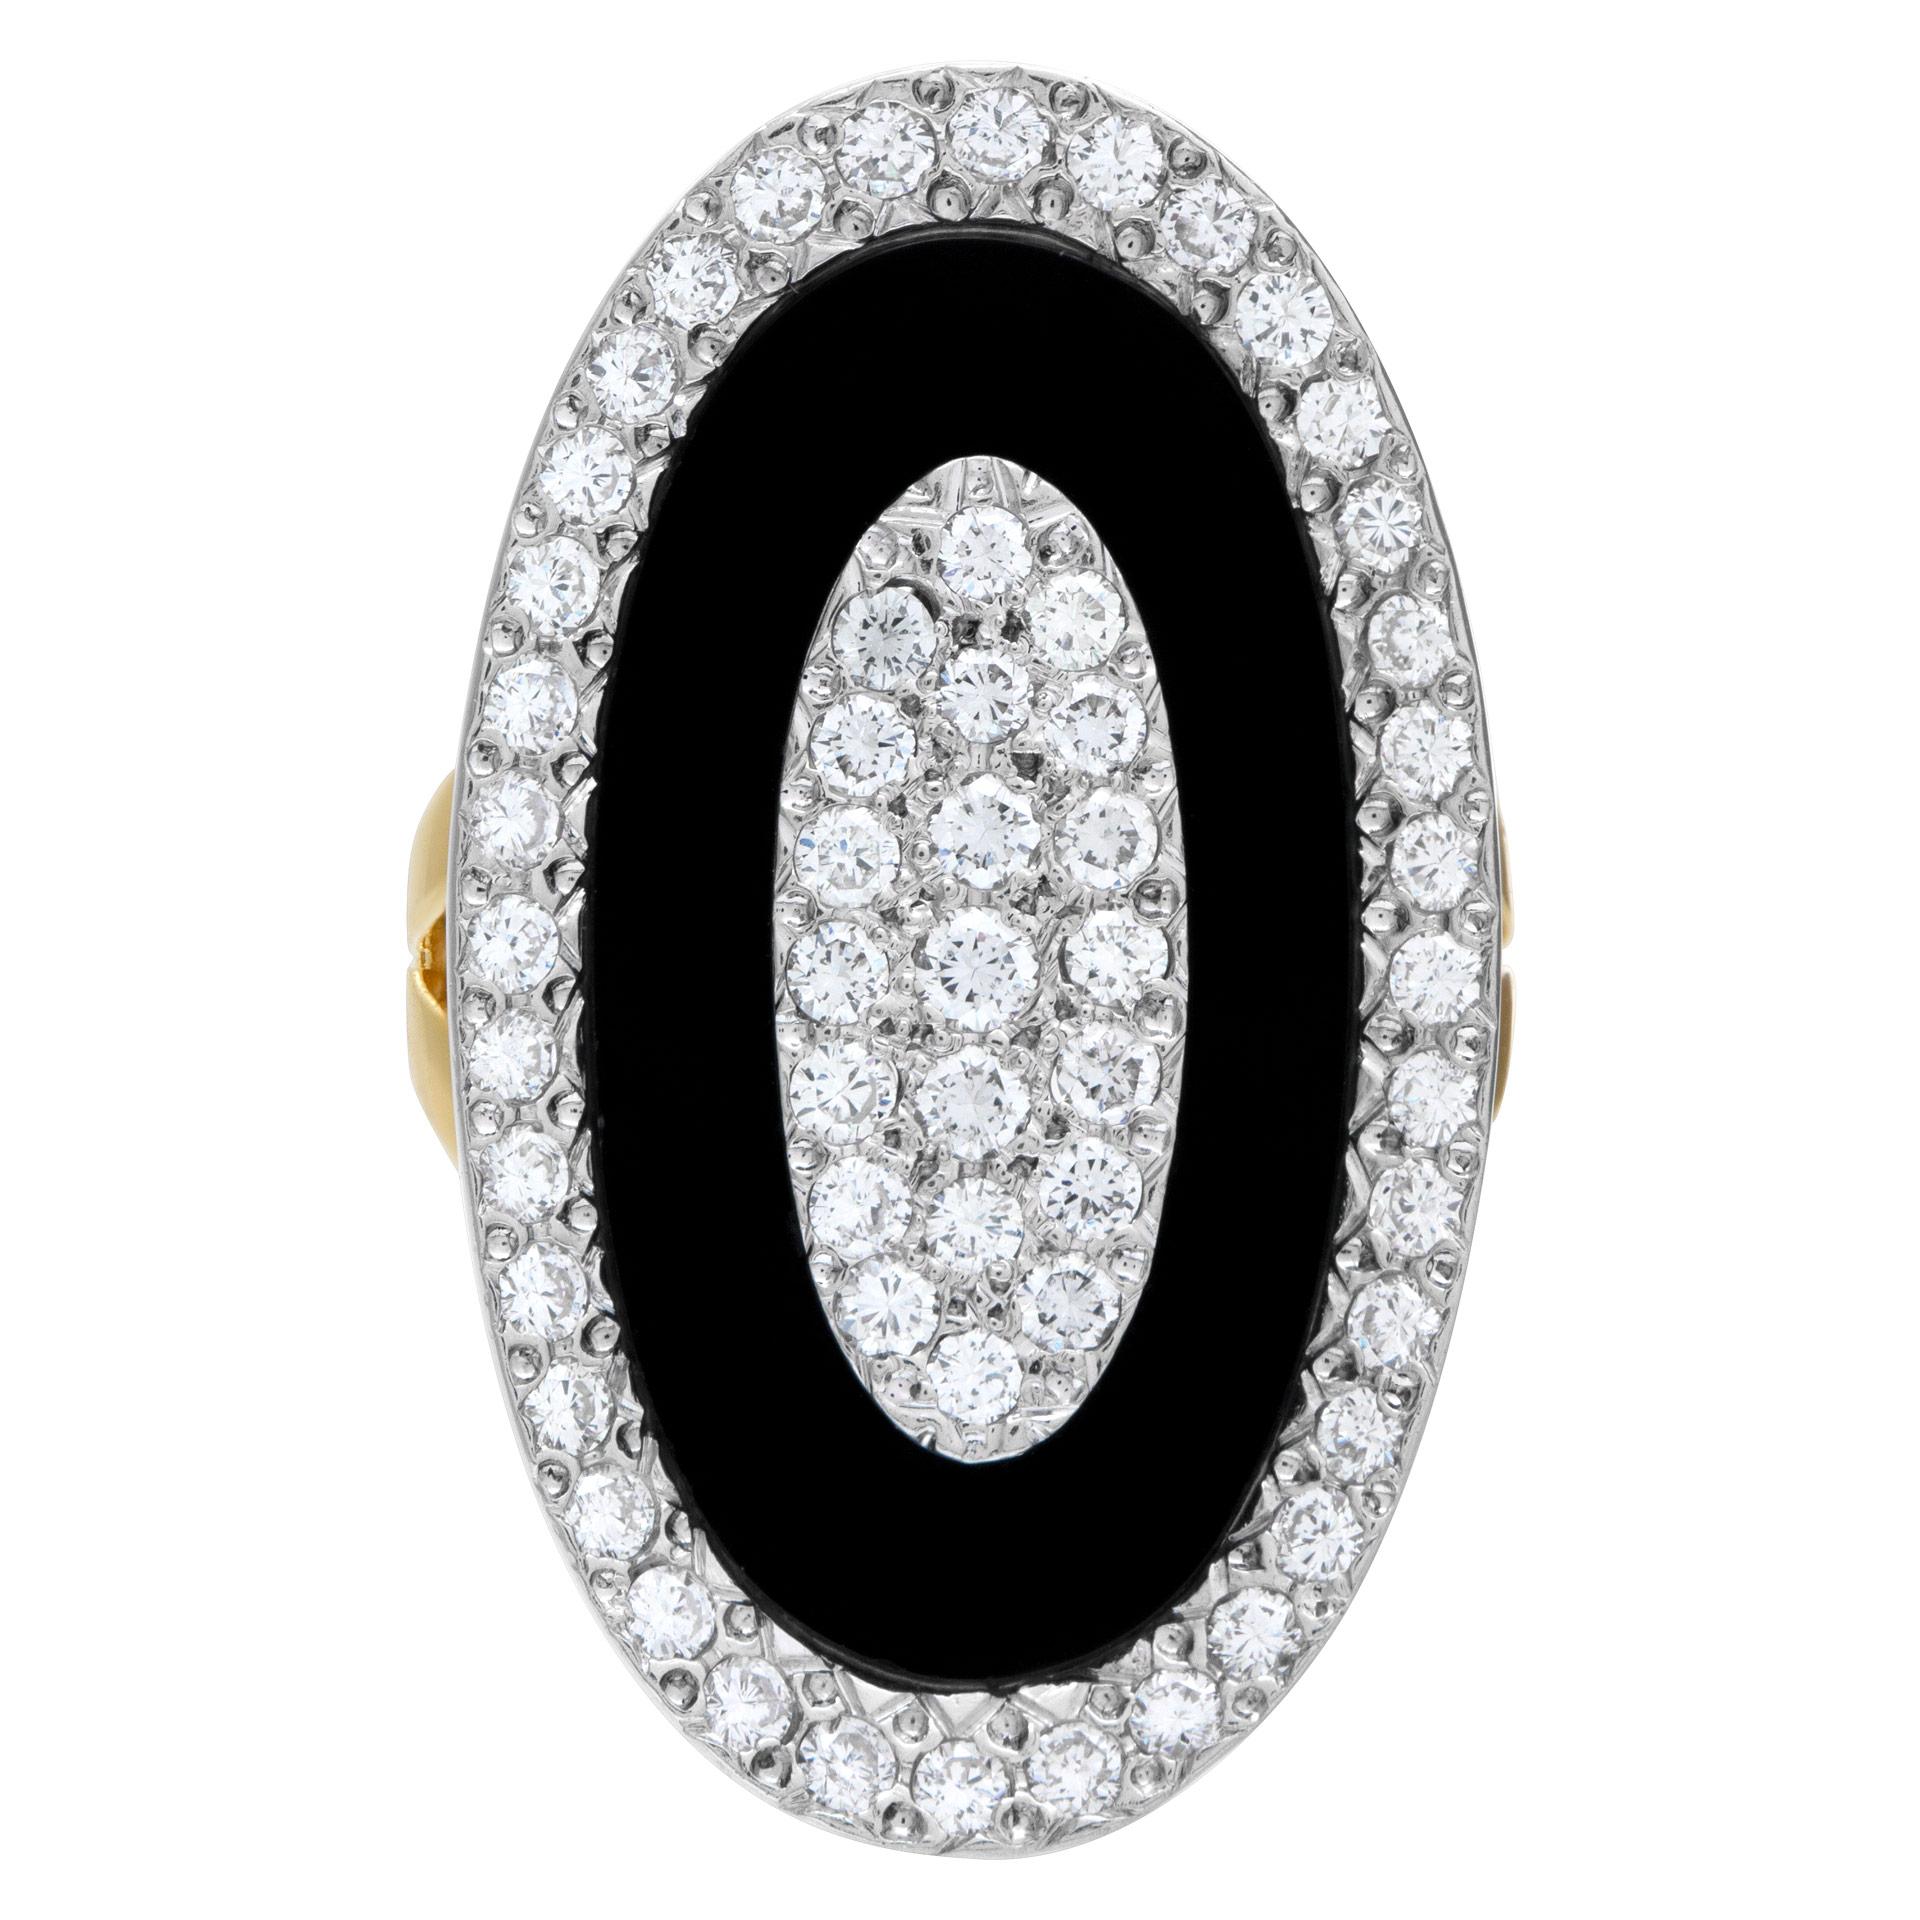 ESTIMATED RETAIL $9000 - YOUR PRICE $5040 - 100% AUTHENTIC - Spectacular onyx and diamond ring in 18k yellow gold with 1.60 carats in G-H color, VS-SI clarity diamonds. Top of the ring measures 33.5mm (L) x 20mm (W). Ring size 7.